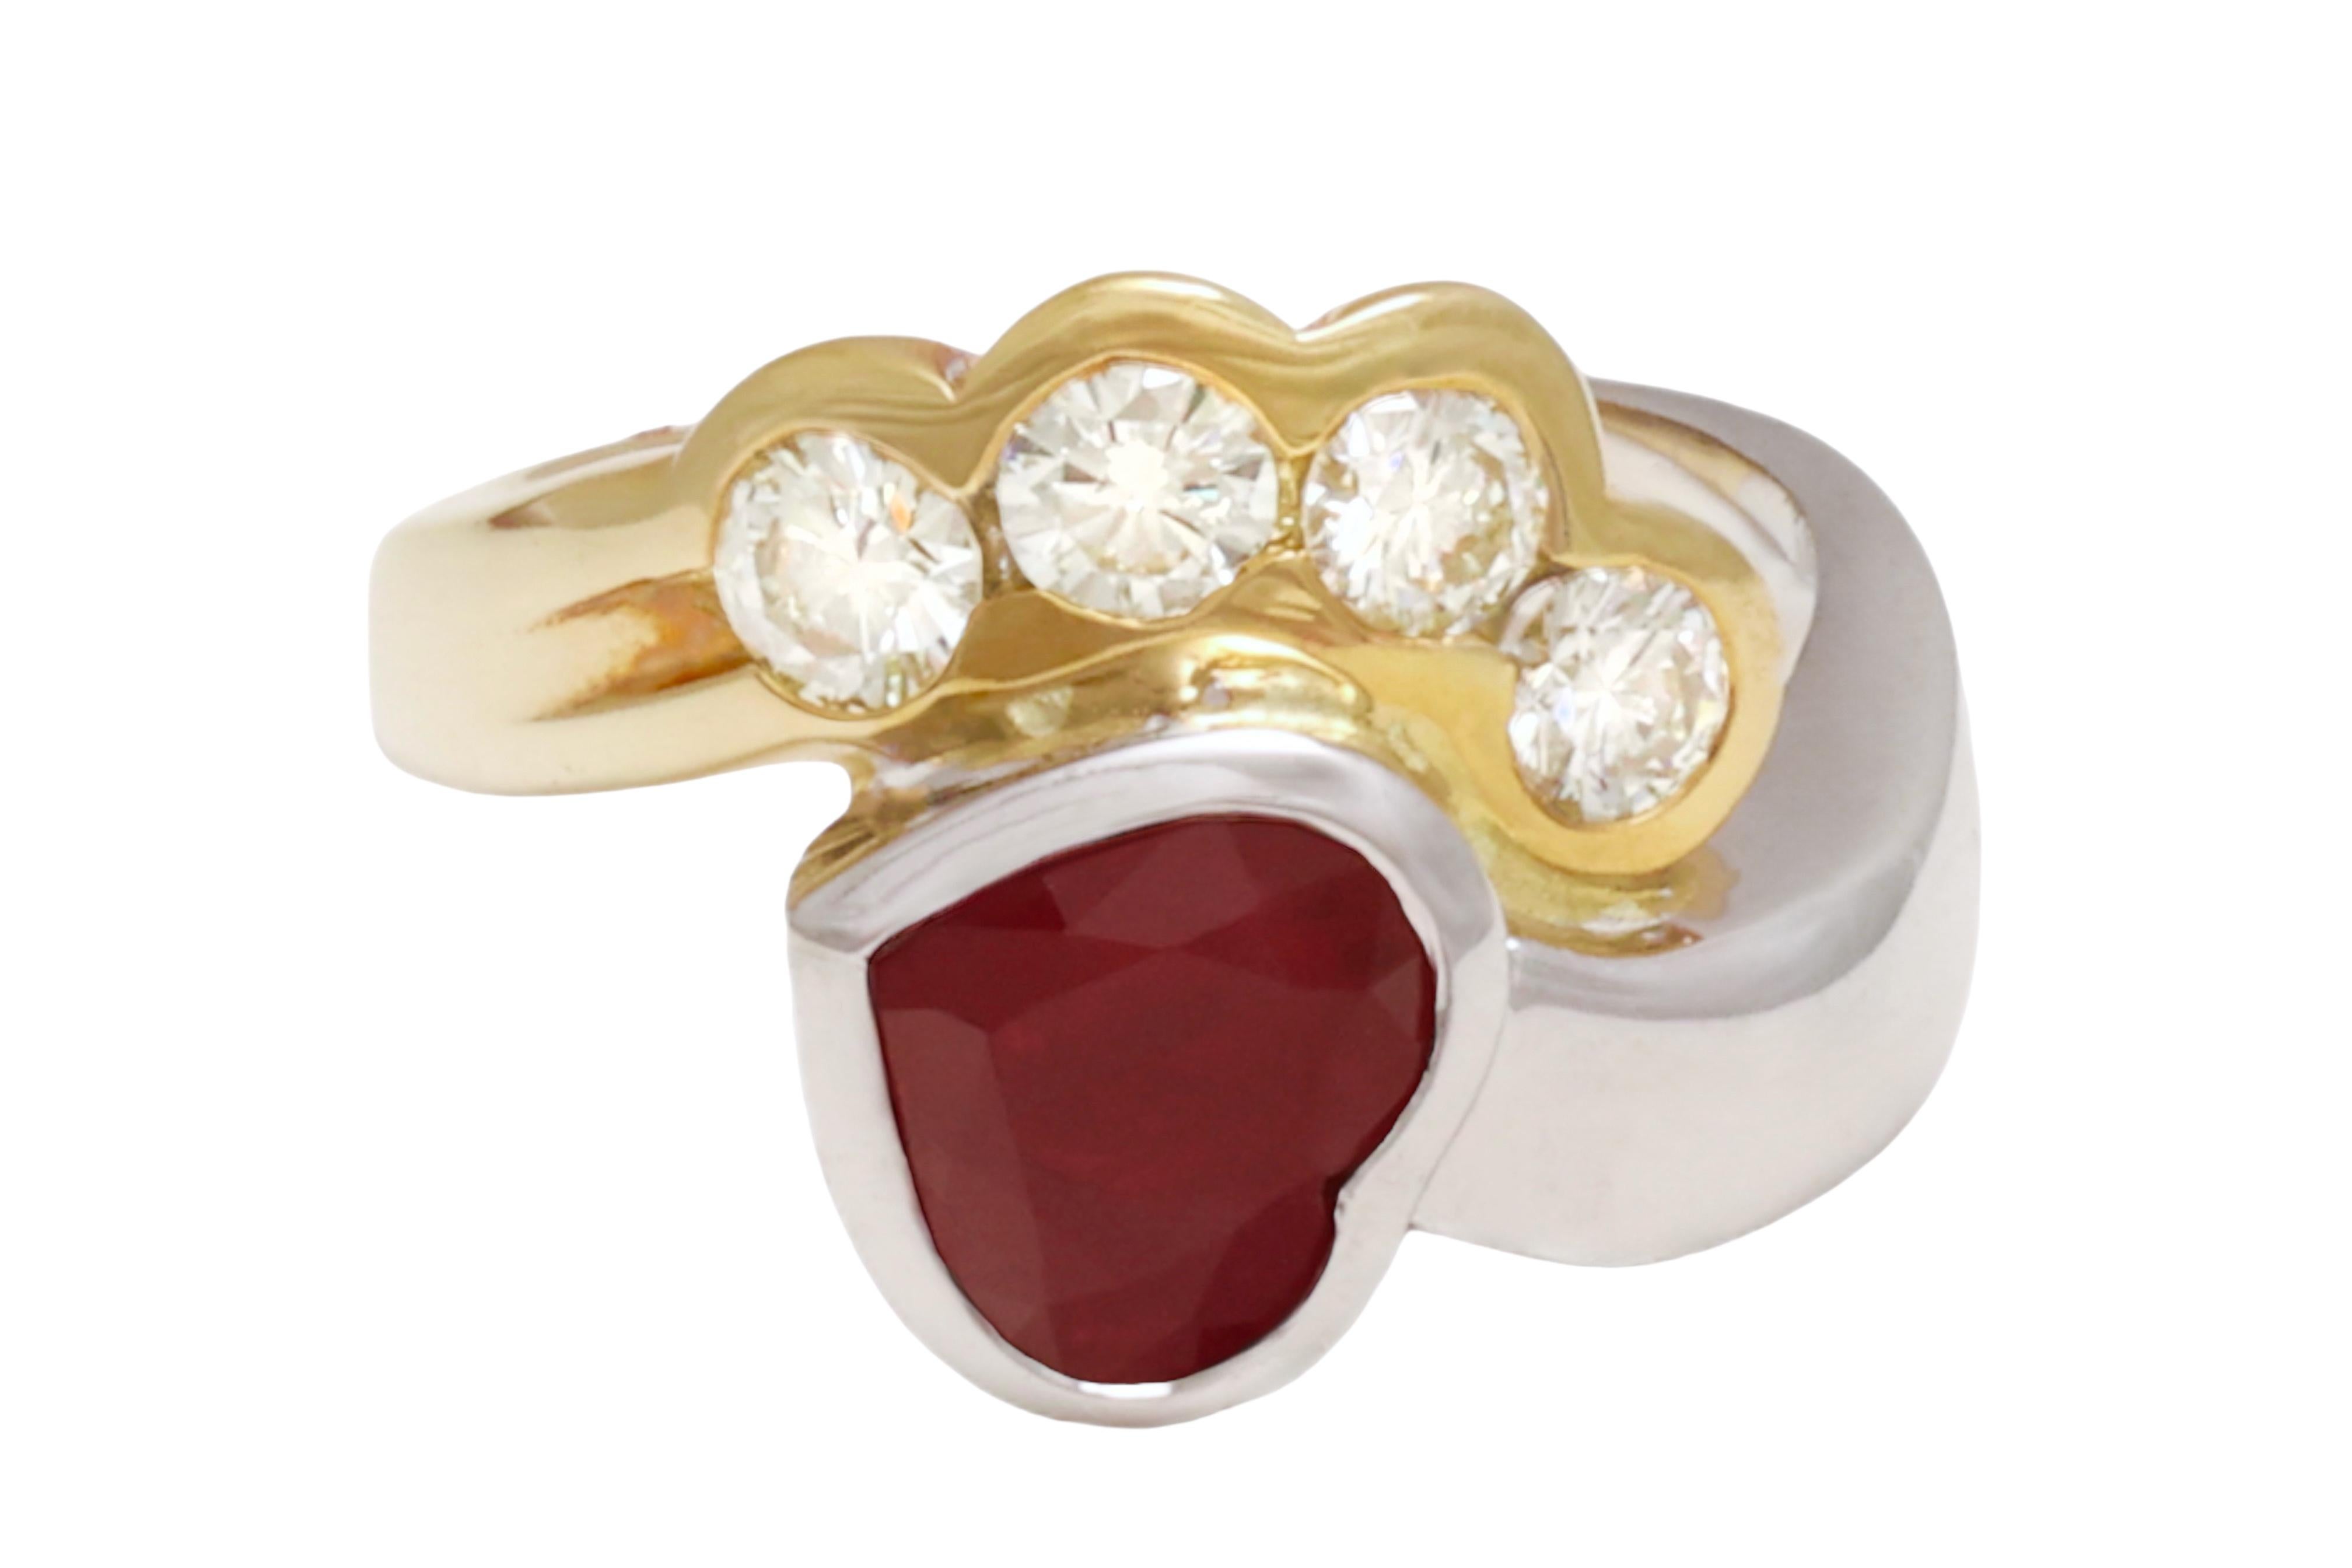 Beautiful 18kt Yellow and White Gold Ring with 4 Diamonds and Heart Shaped Ruby For Sale 2